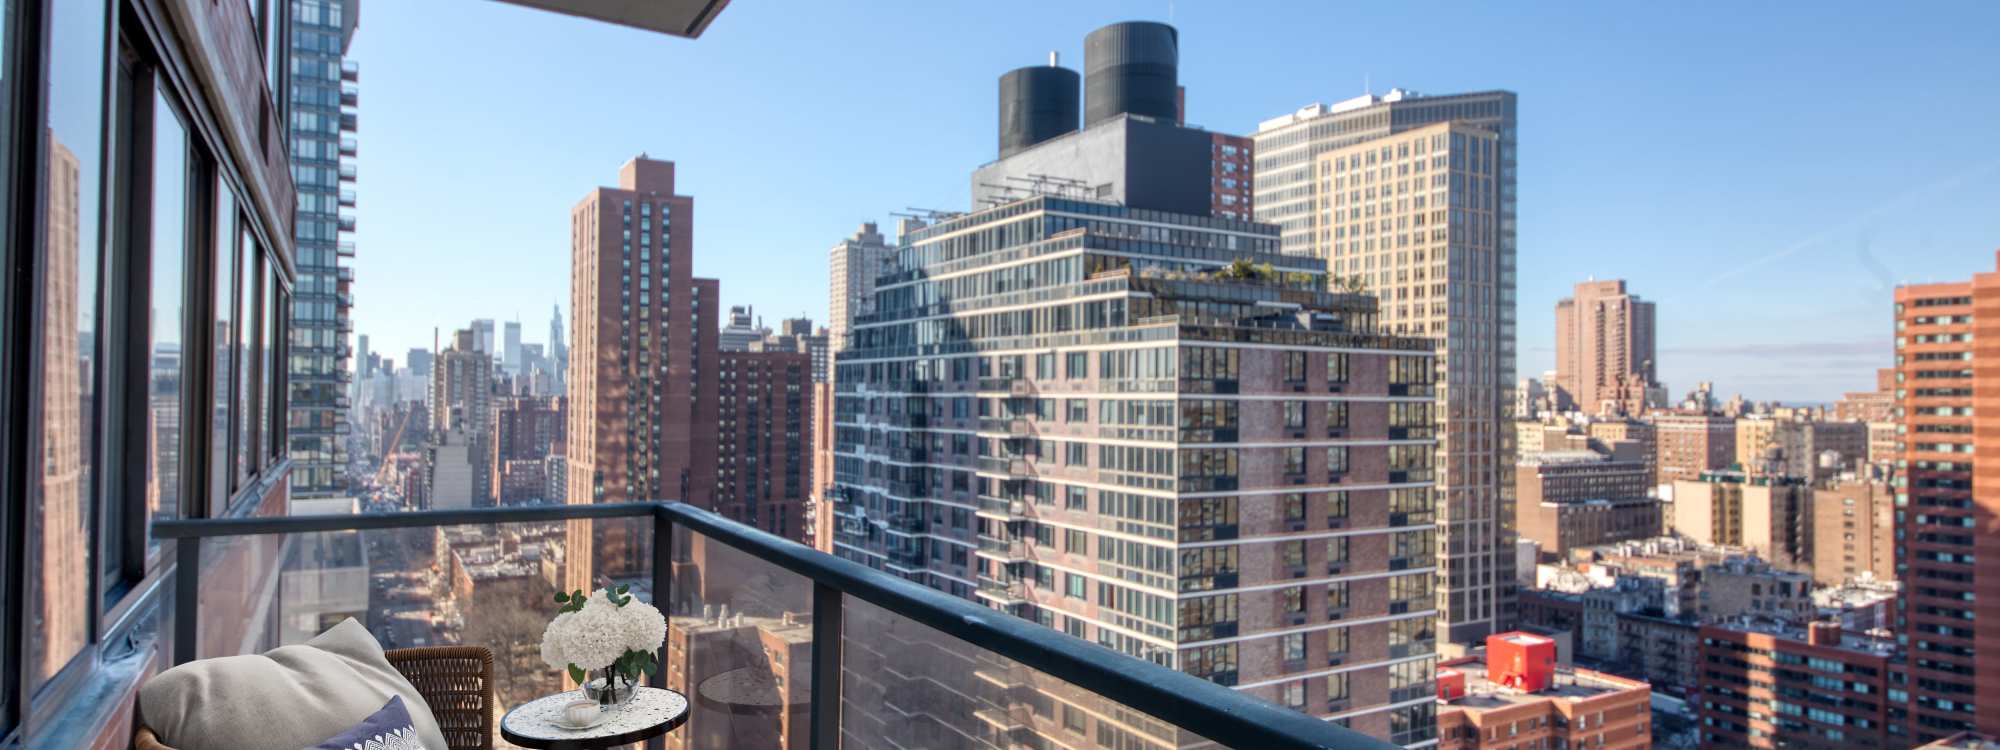 Roof top terrace at 301 E 94th Street in New York, New York